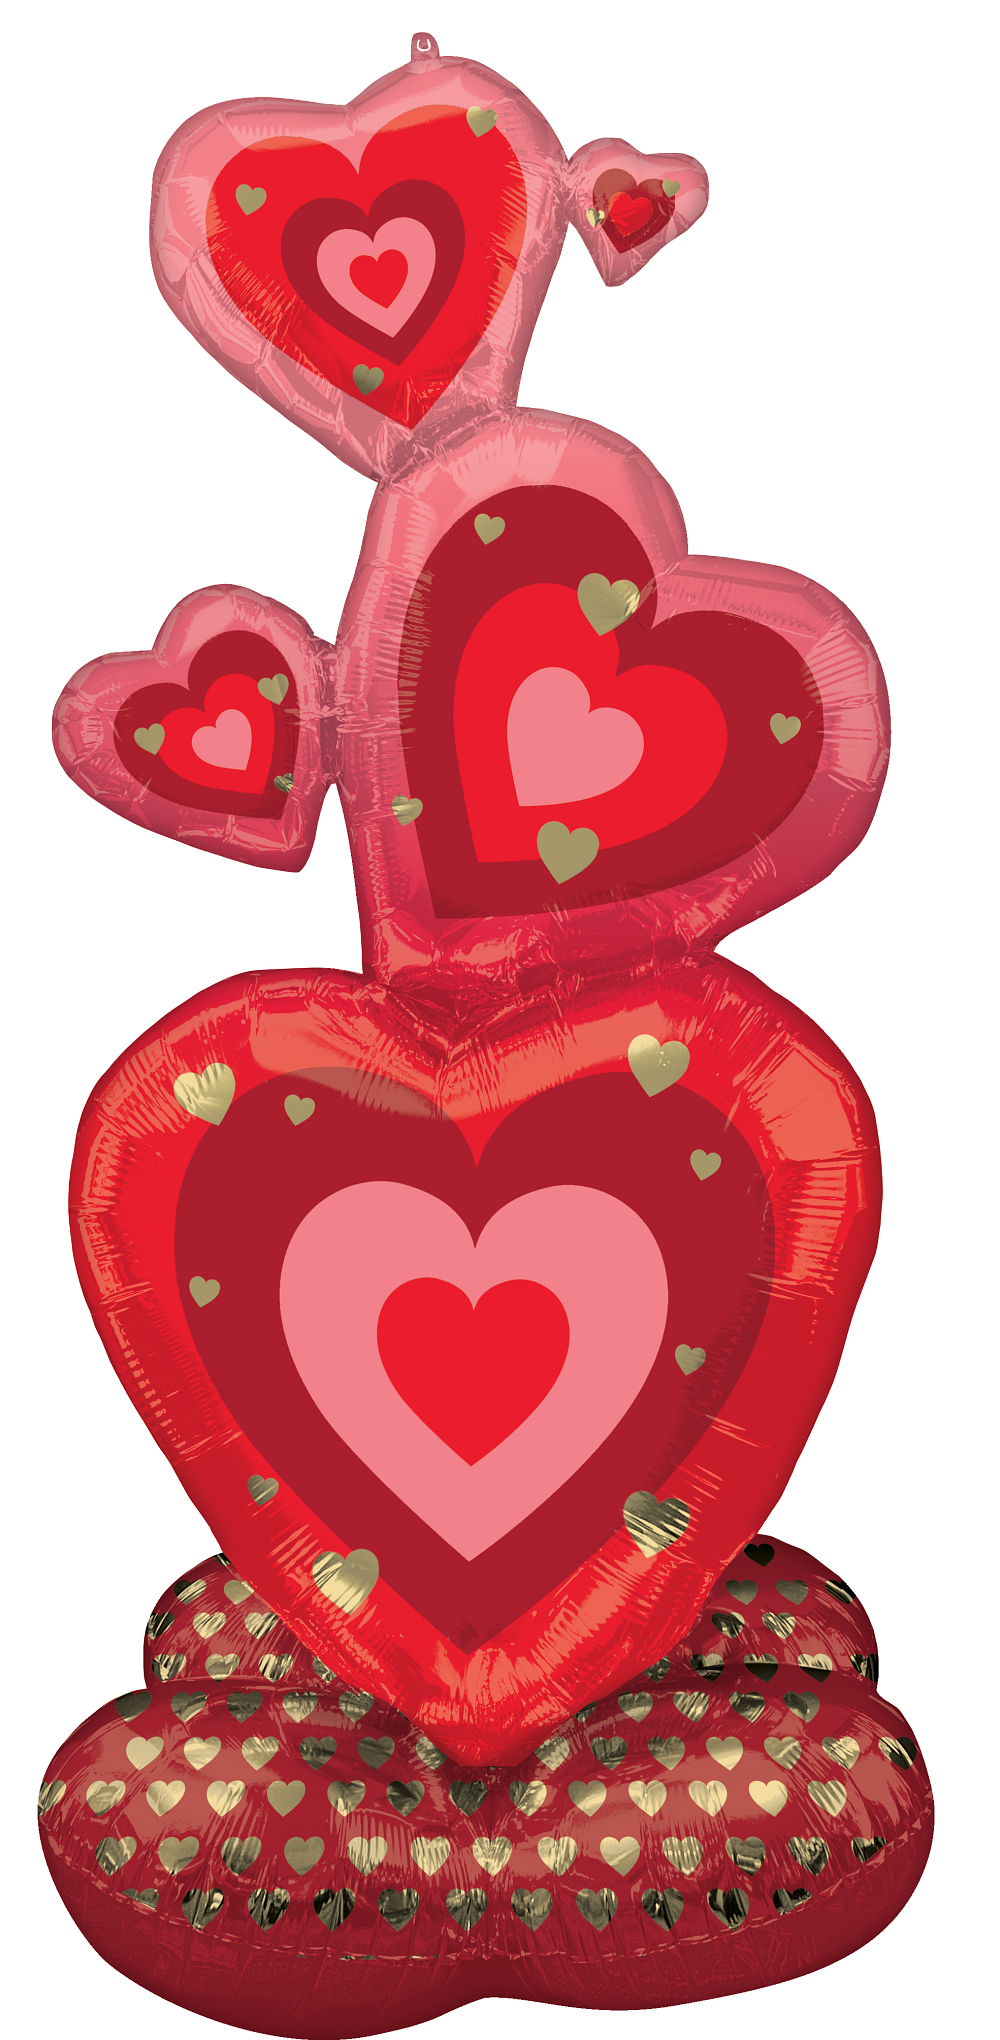 43731-stacking-hearts-front.psd.jpg